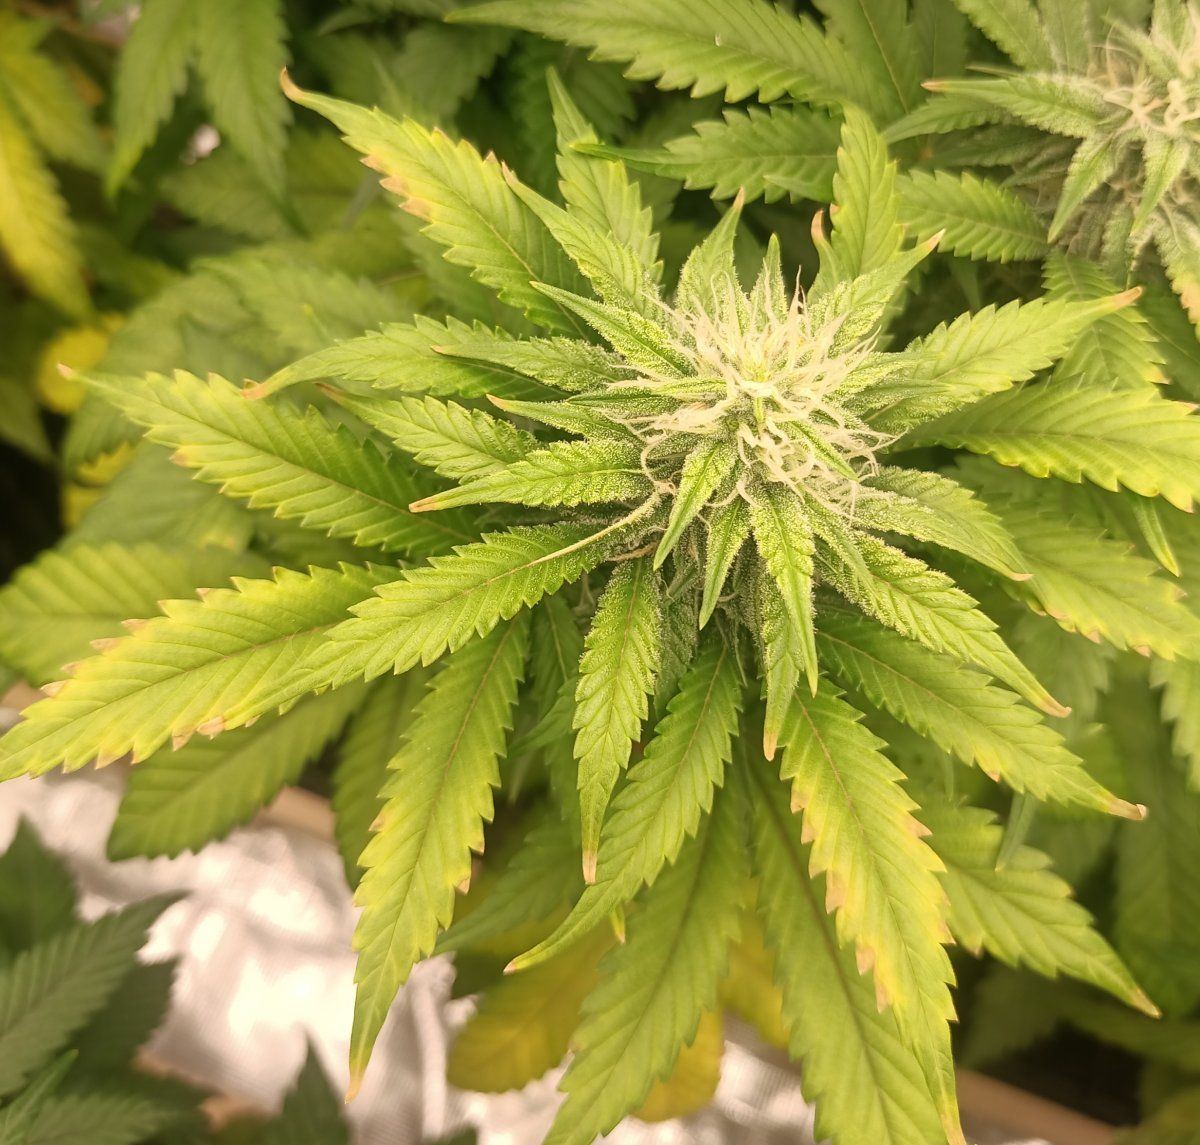 Whats wrong with my plants